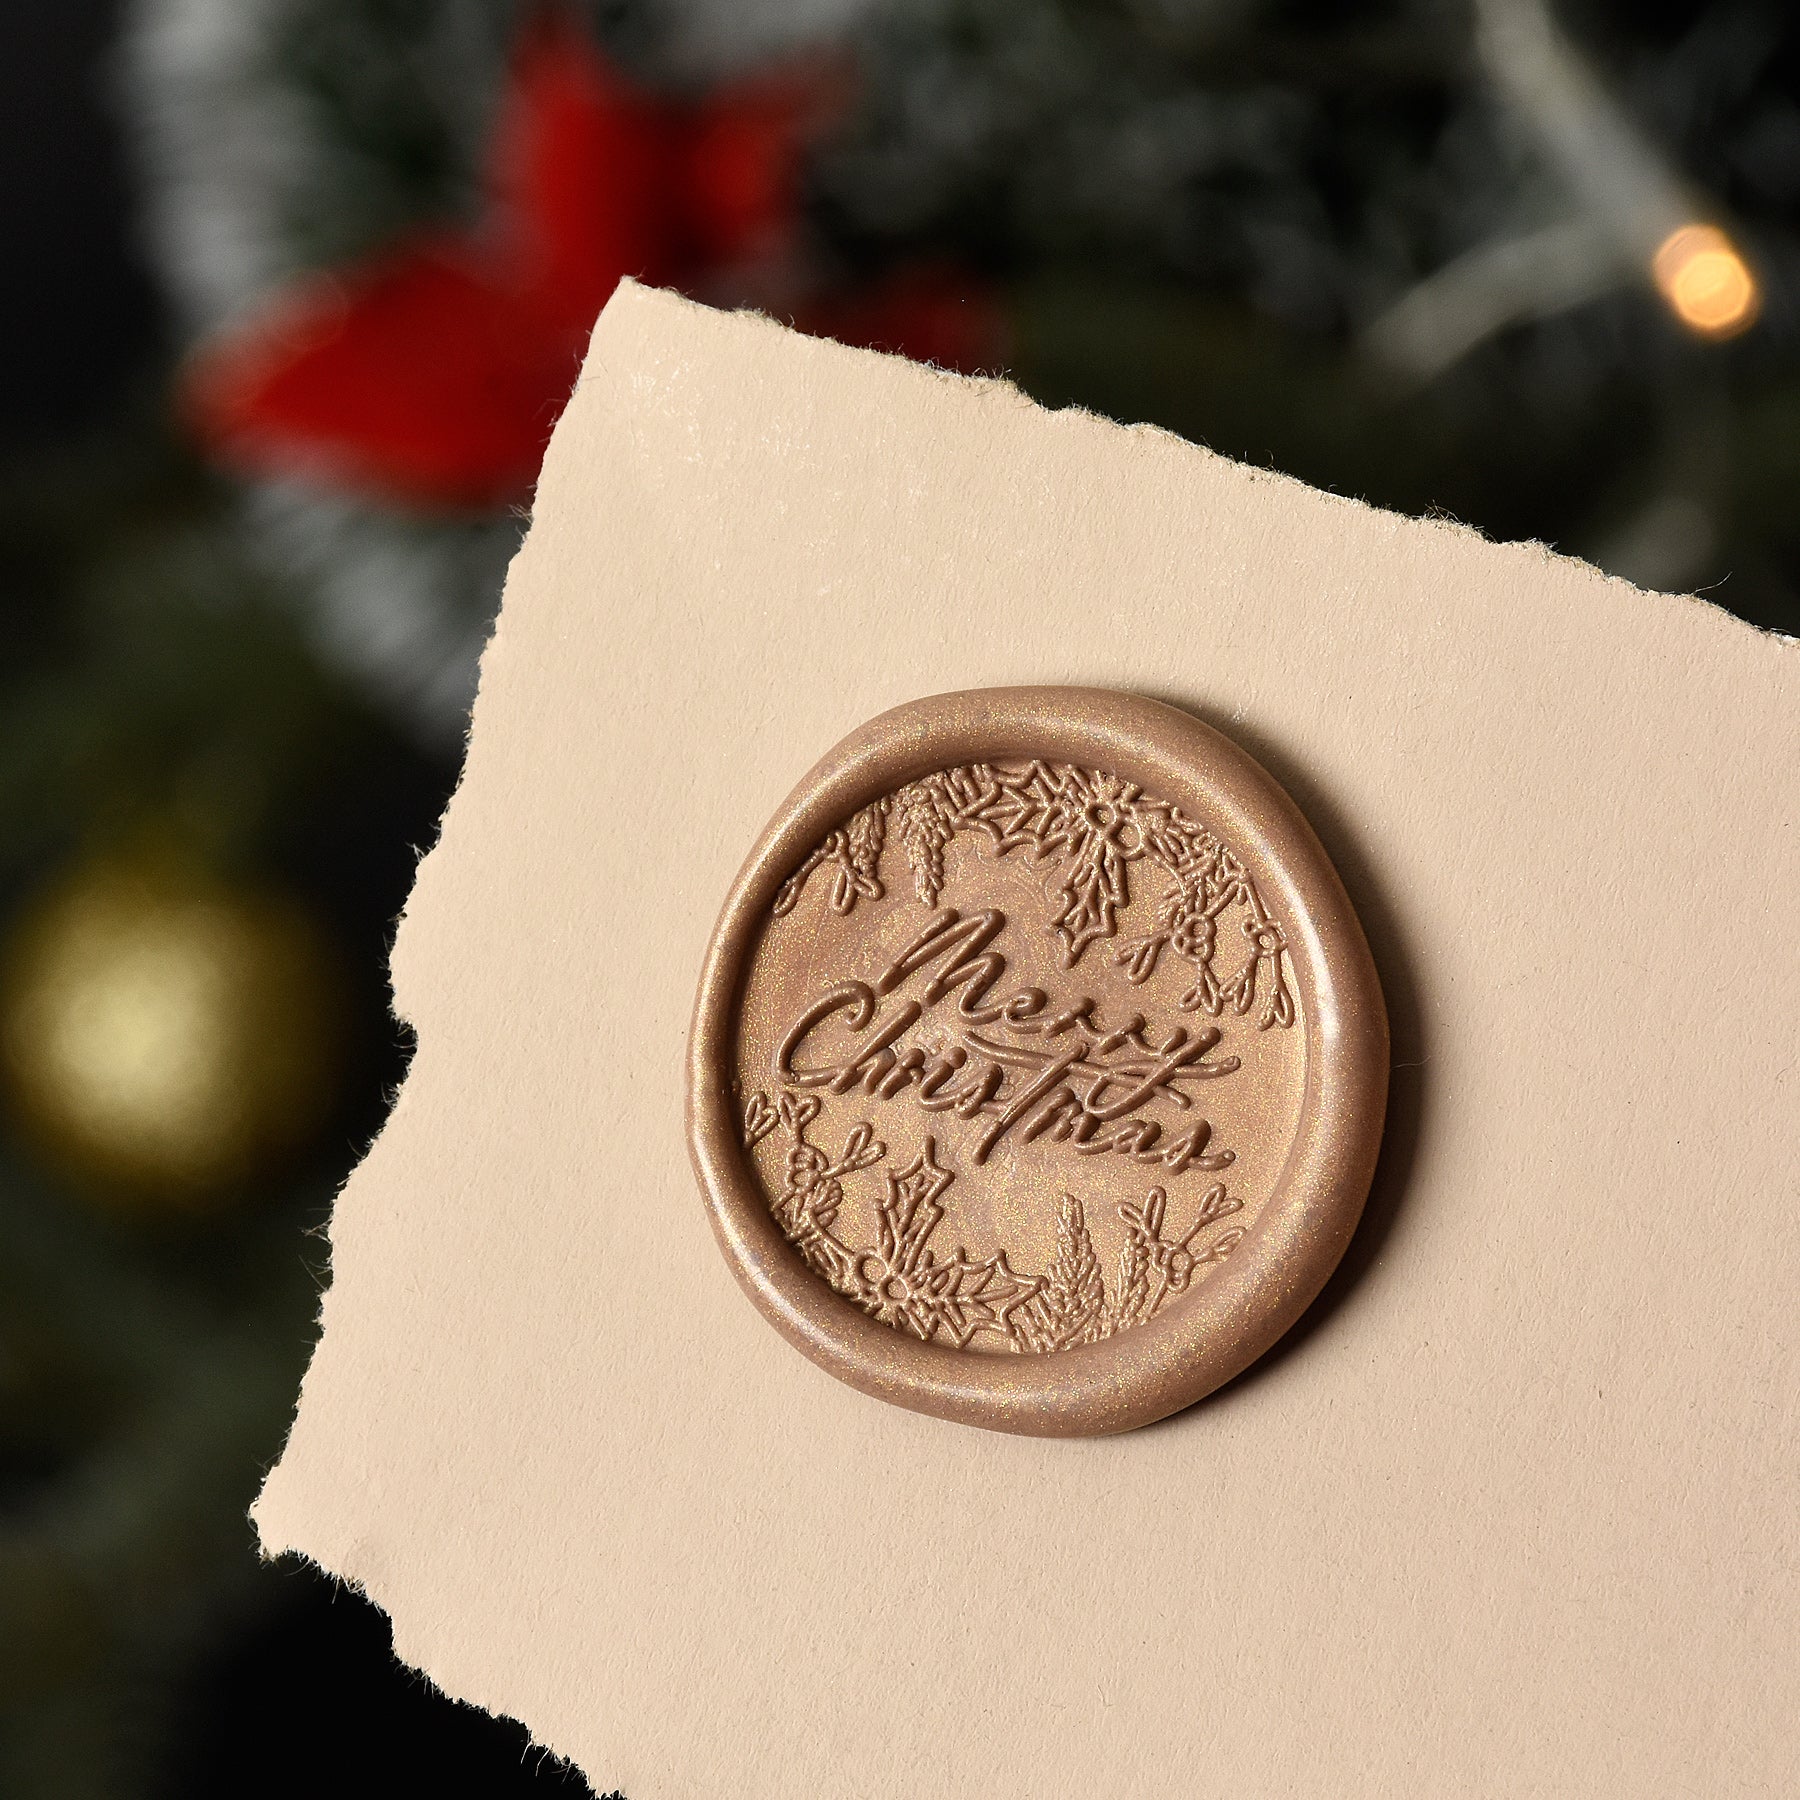 Keep Calm and Merry On - Christmas Collection Wax Seal Stamp by Get Ma -  GetMarked™ • Wax Seals & Stamping Goods HQ •